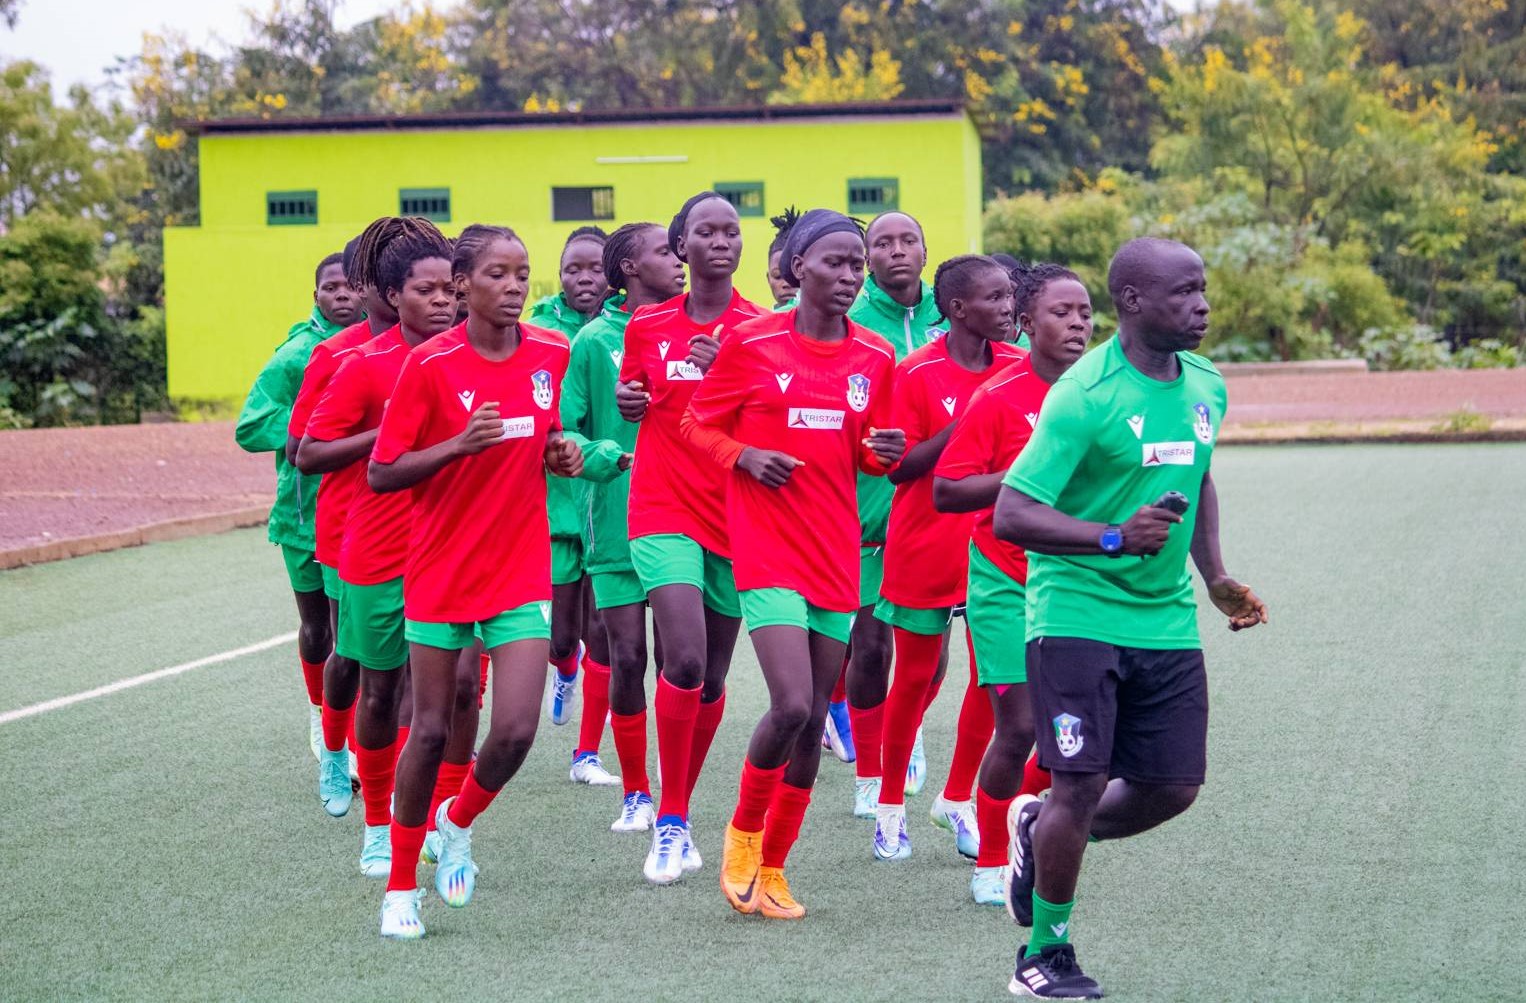 SSFA vows to develop strong women’s football team